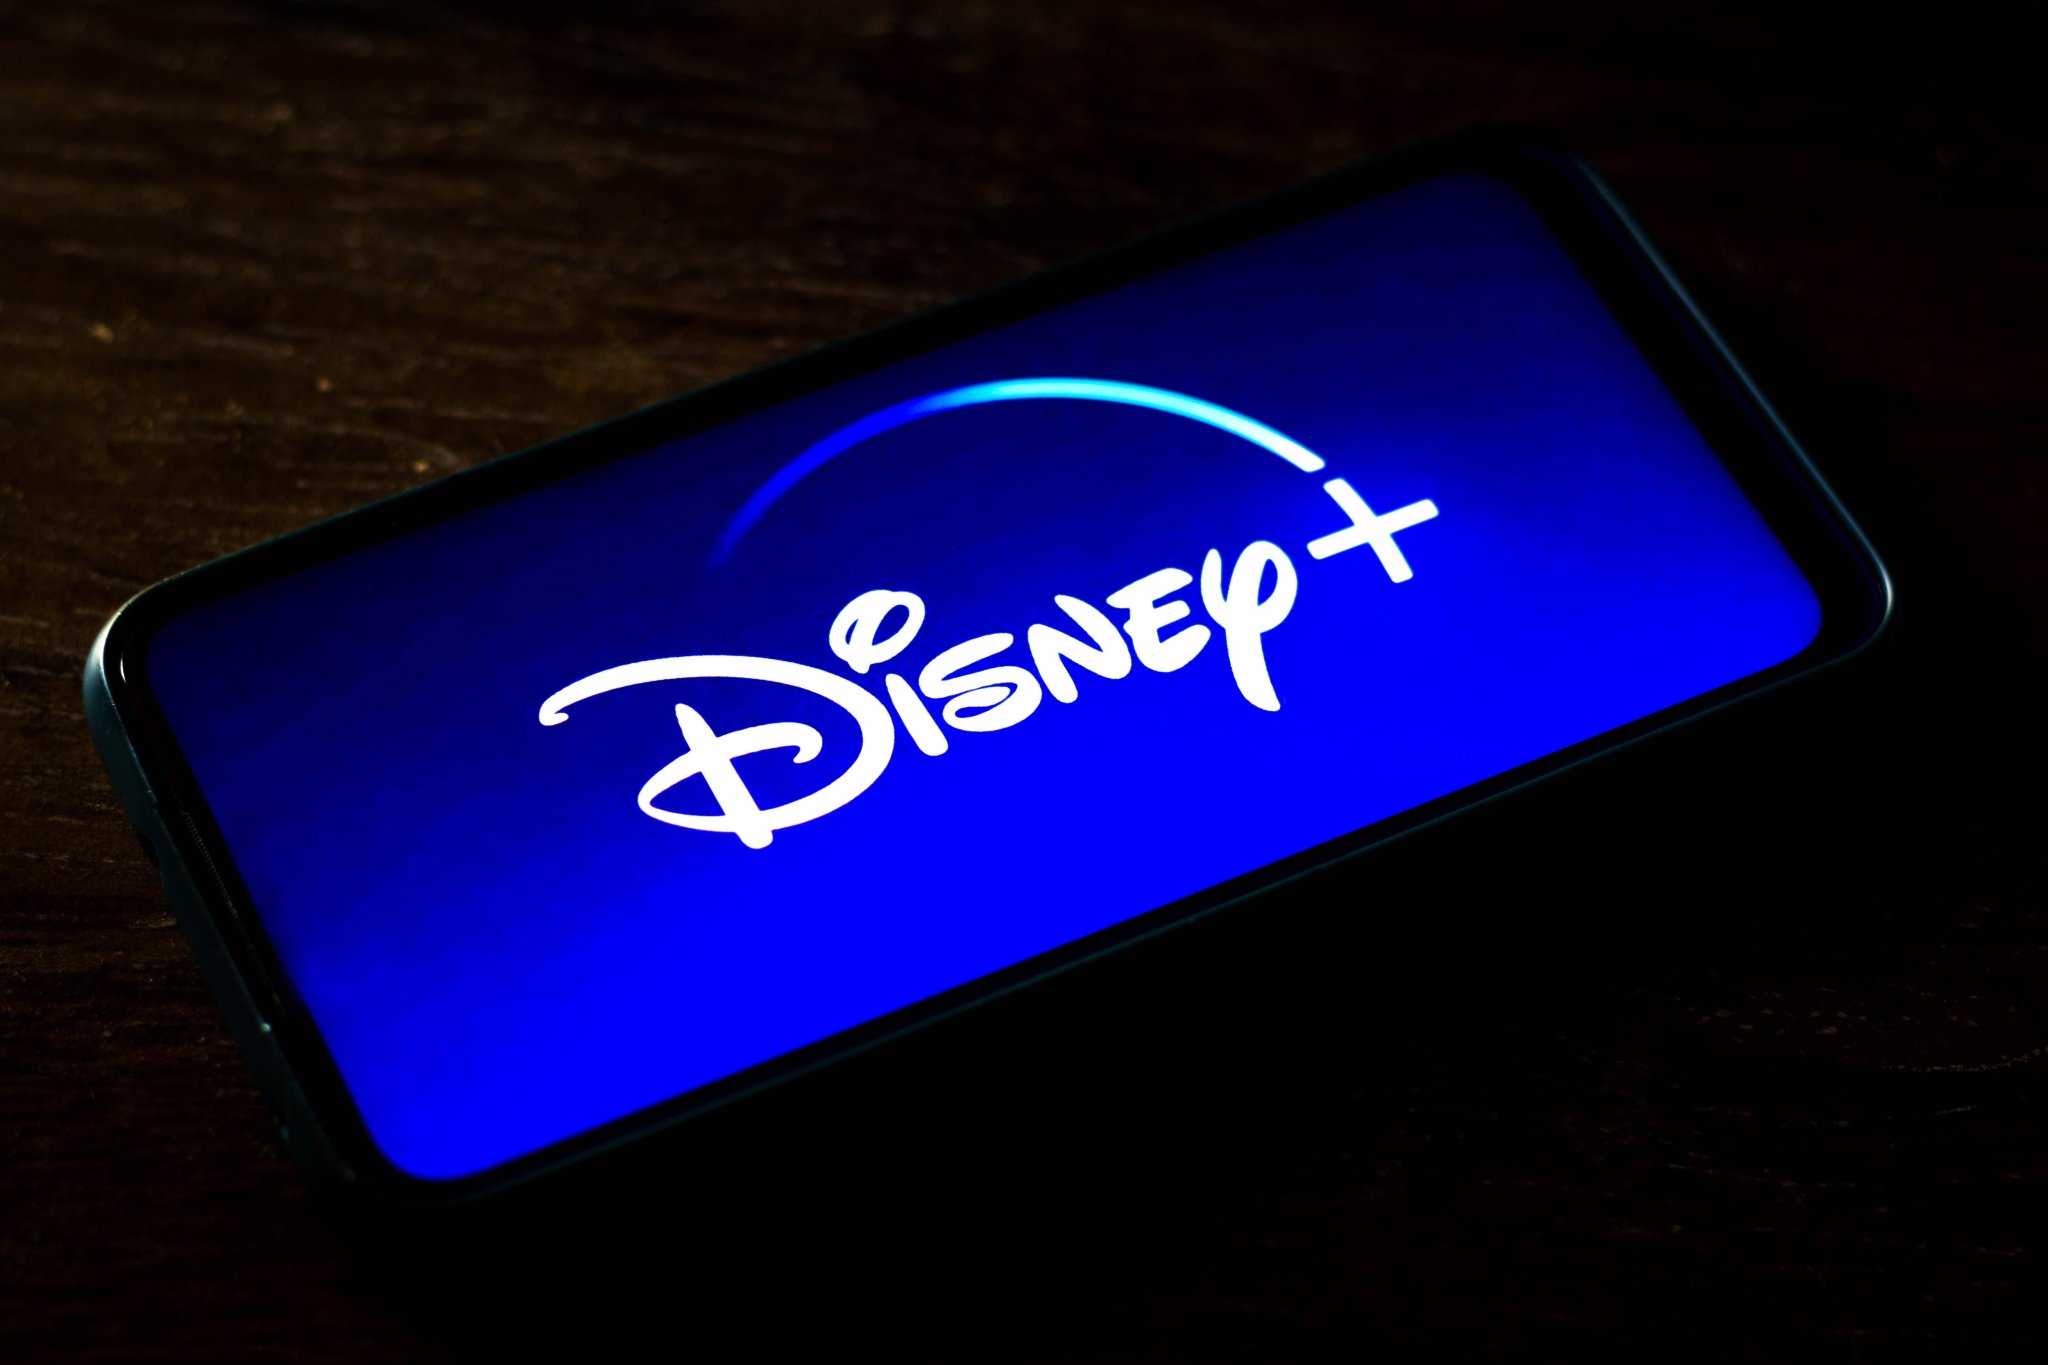 Disney+ launches its ad-supported tier to compete with Netflix